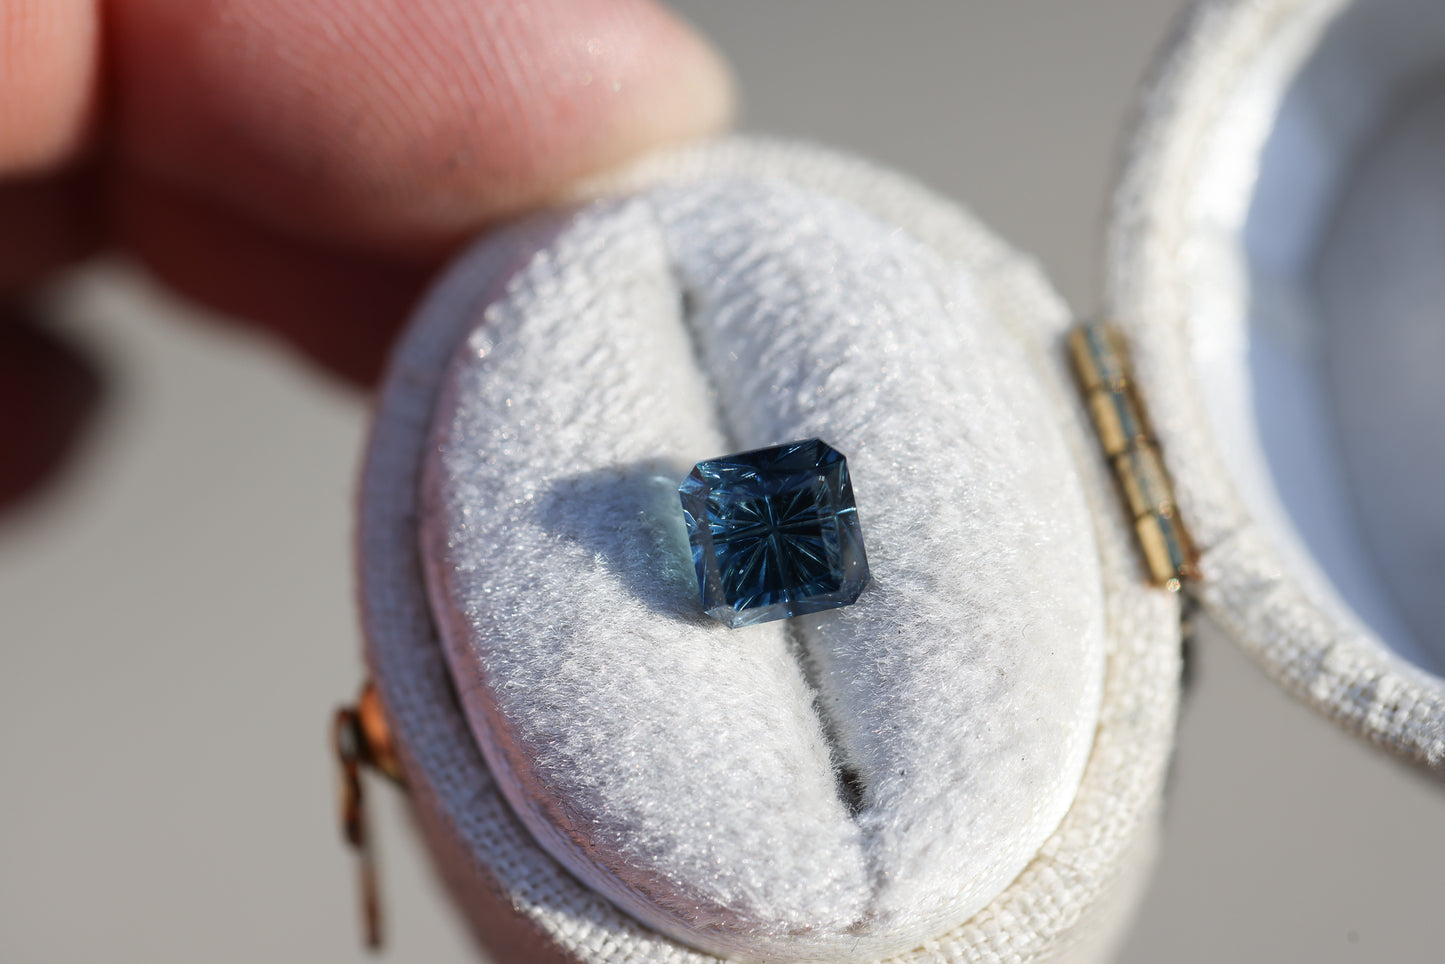 2.04ct square deep blue teal sapphire - Starbrite cut by John Dyer